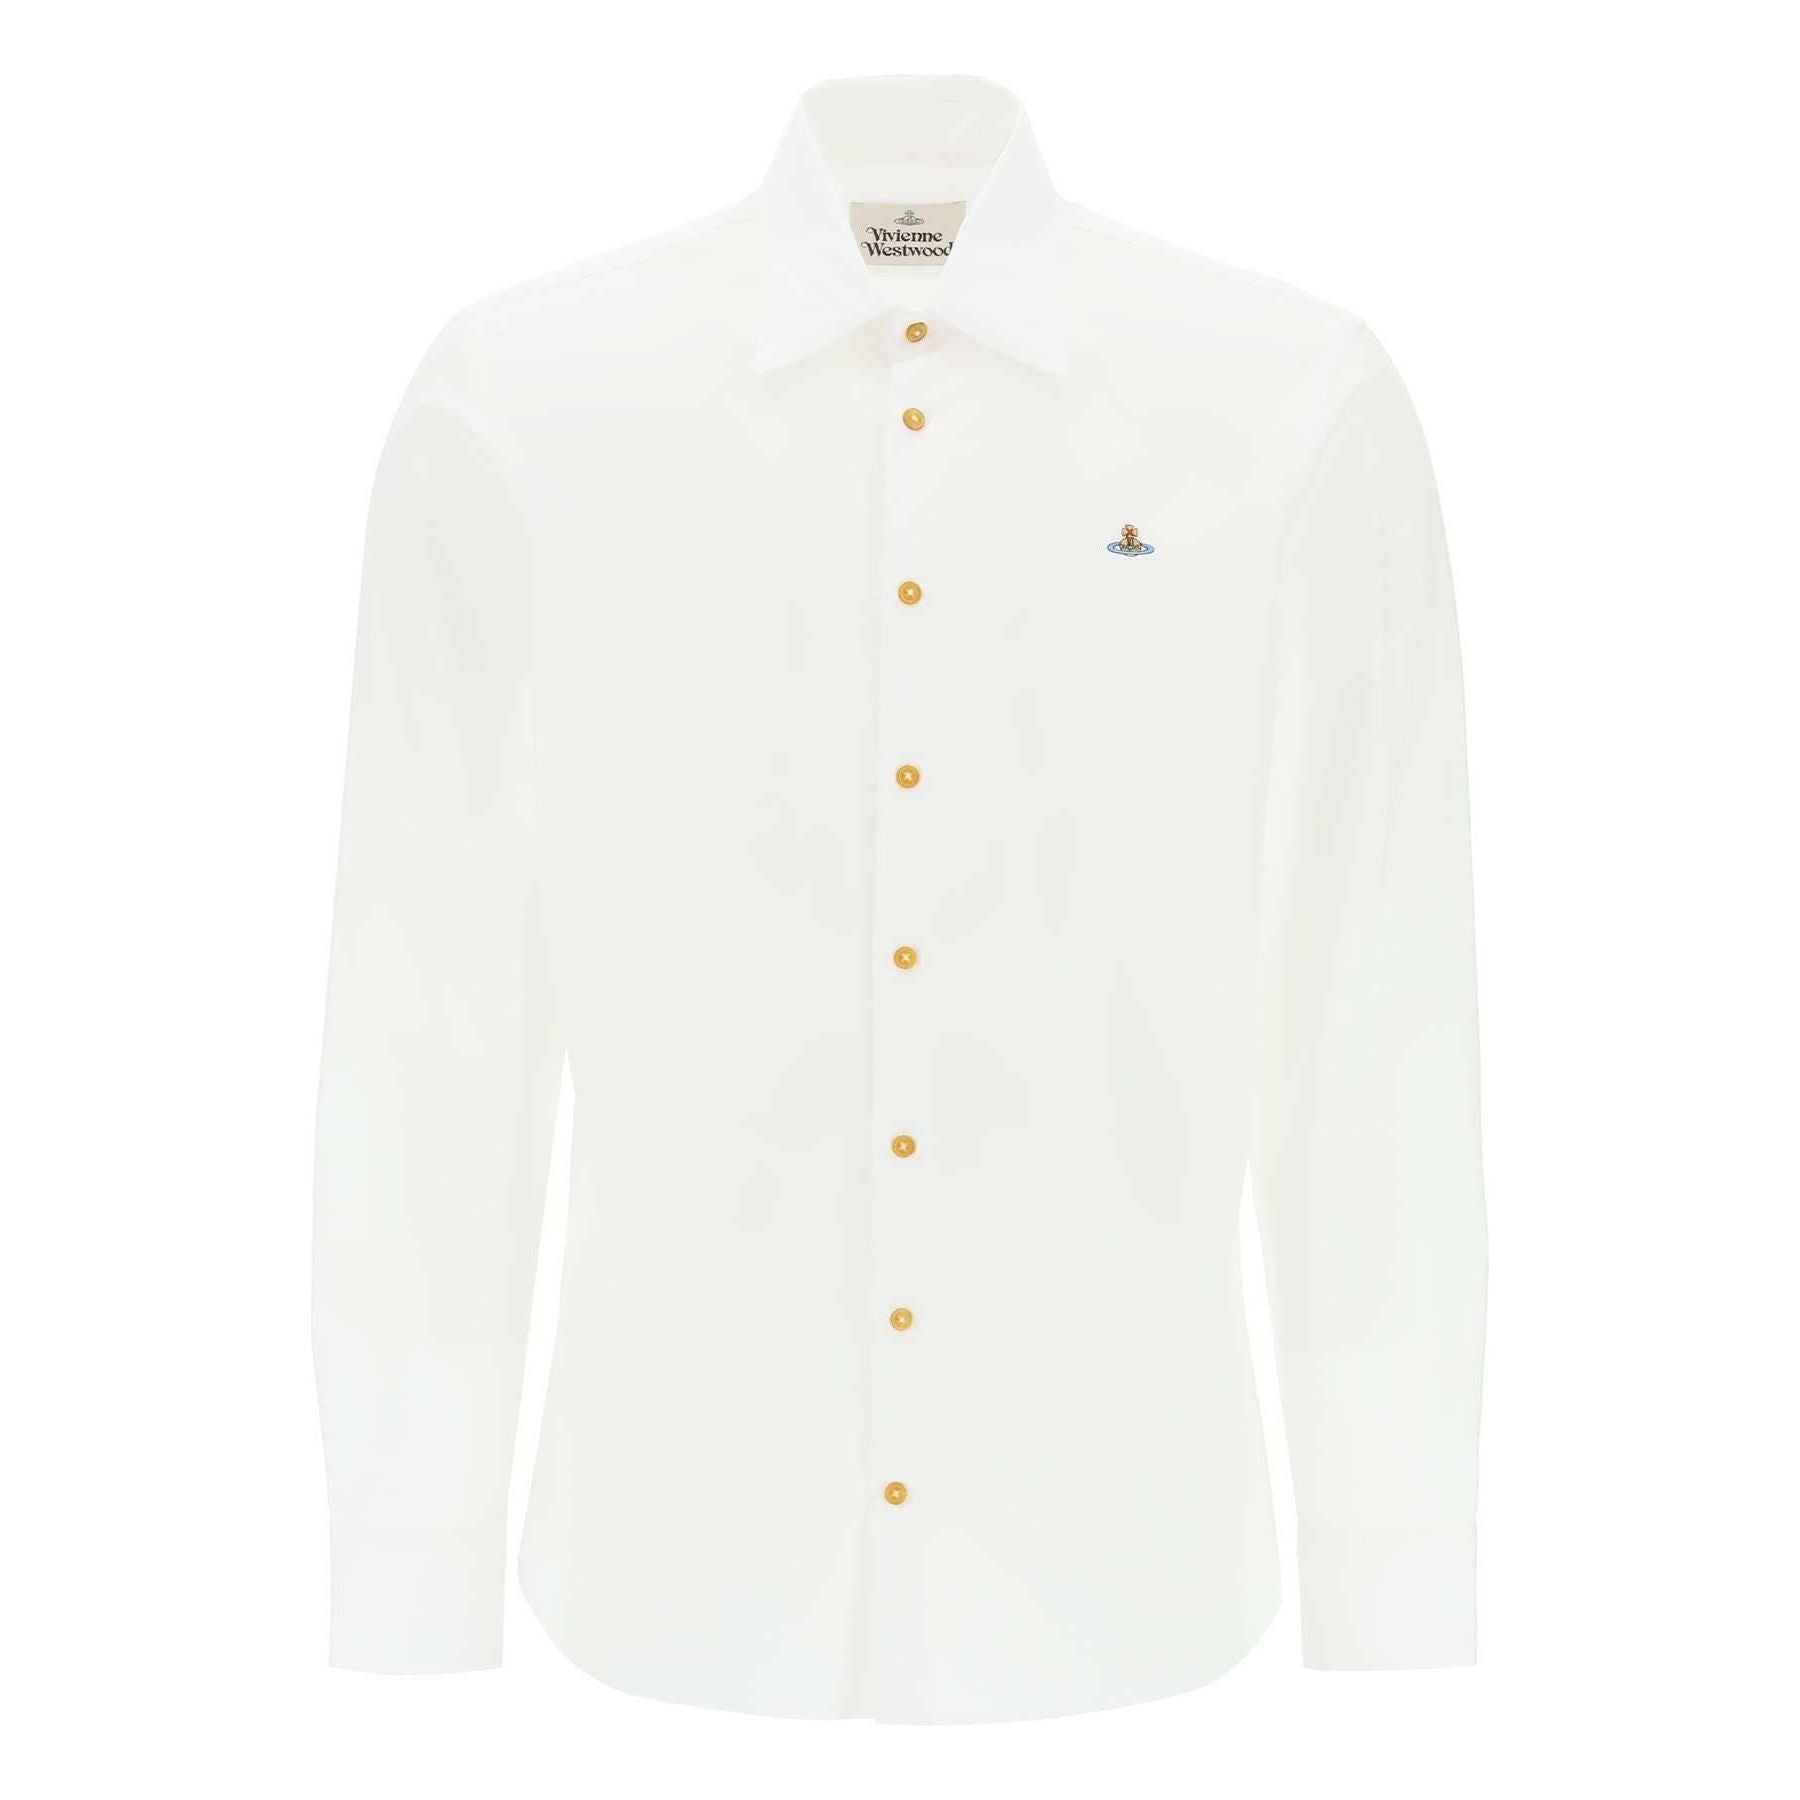 Ghost Shirt With Orb Embroidery VIVIENNE WESTWOOD JOHN JULIA.